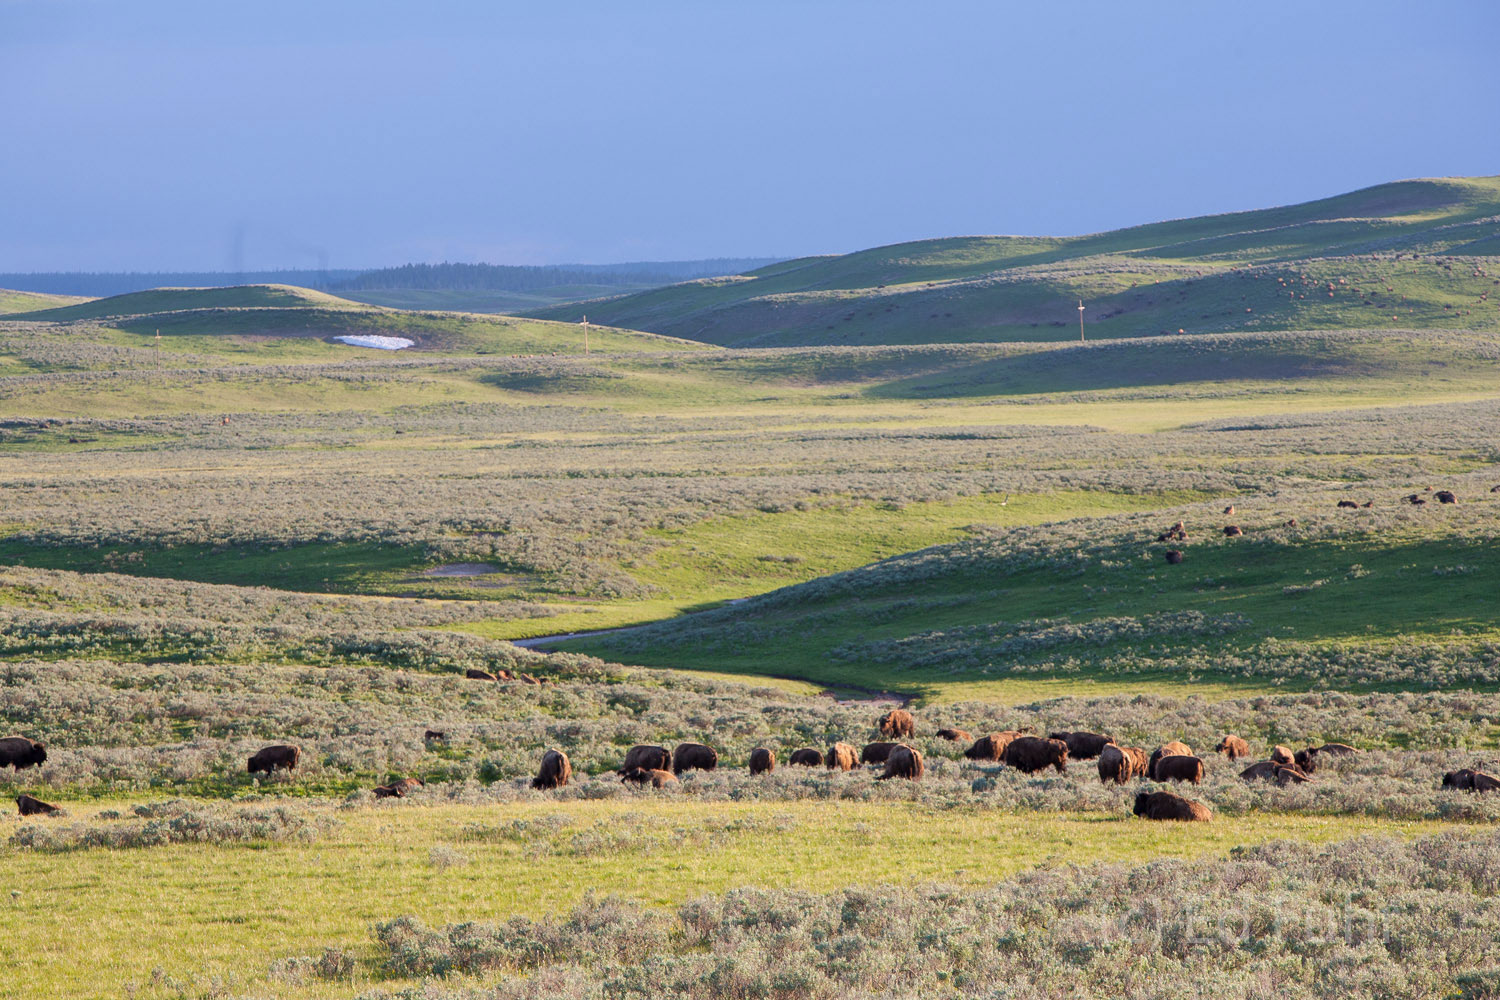 The Lamar Valley has been called America's Serengetti because of the great numbers and kinds of wildlife that call it home....